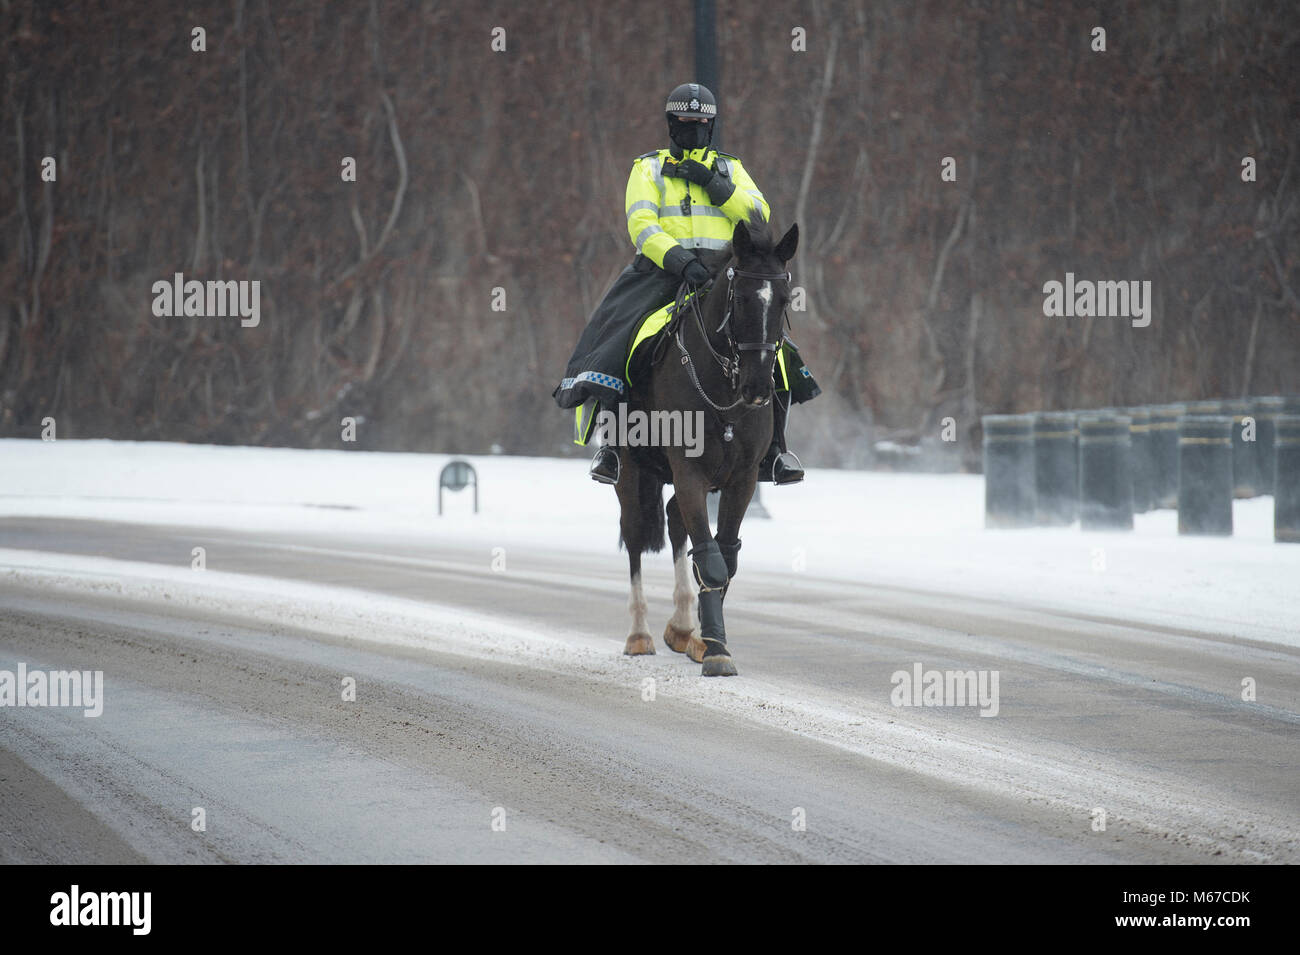 Horse Guards, London, UK. 1 March 2018. After overnight snow continuing into morning rush-hour, an Arctic wind empties London’s tourist haunts. Mounted police officer rides through wind blown snow ahead of the Changing the Guard troop. Credit: Malcolm Park/Alamy Live News. Stock Photo